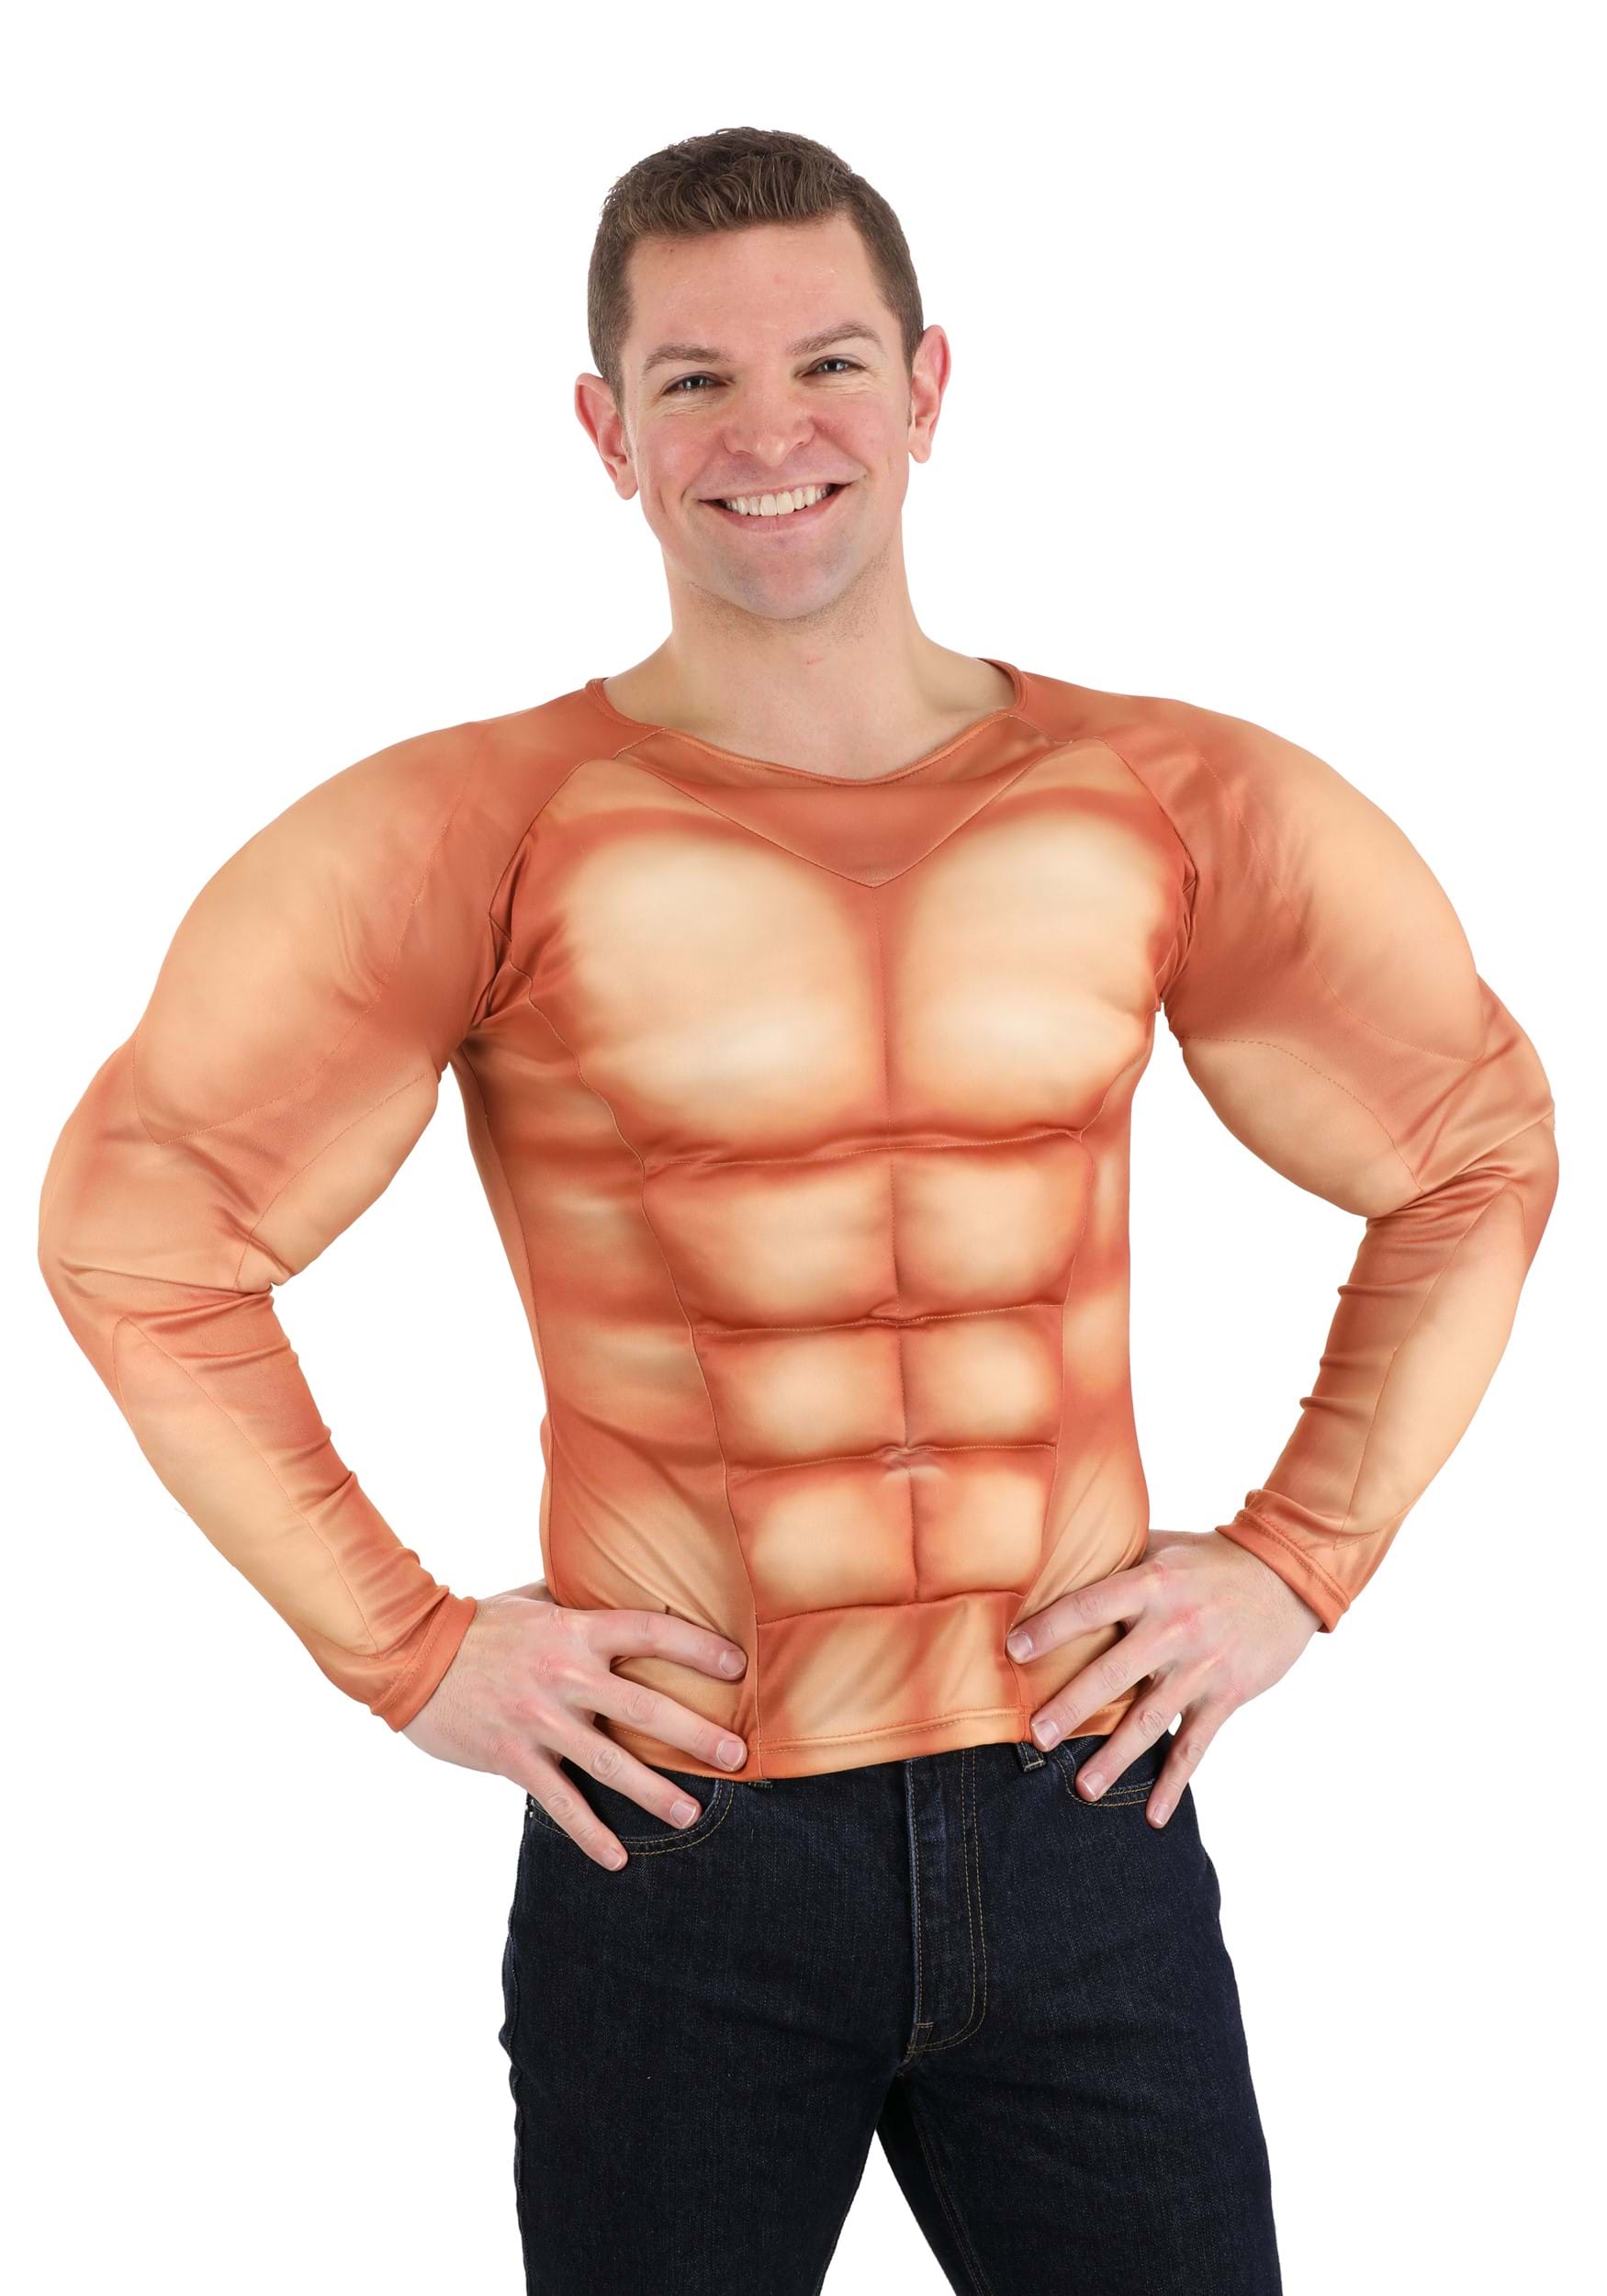 https://images.halloweencostumes.eu/products/70562/1-1/adult-padded-muscle-shirt.jpg